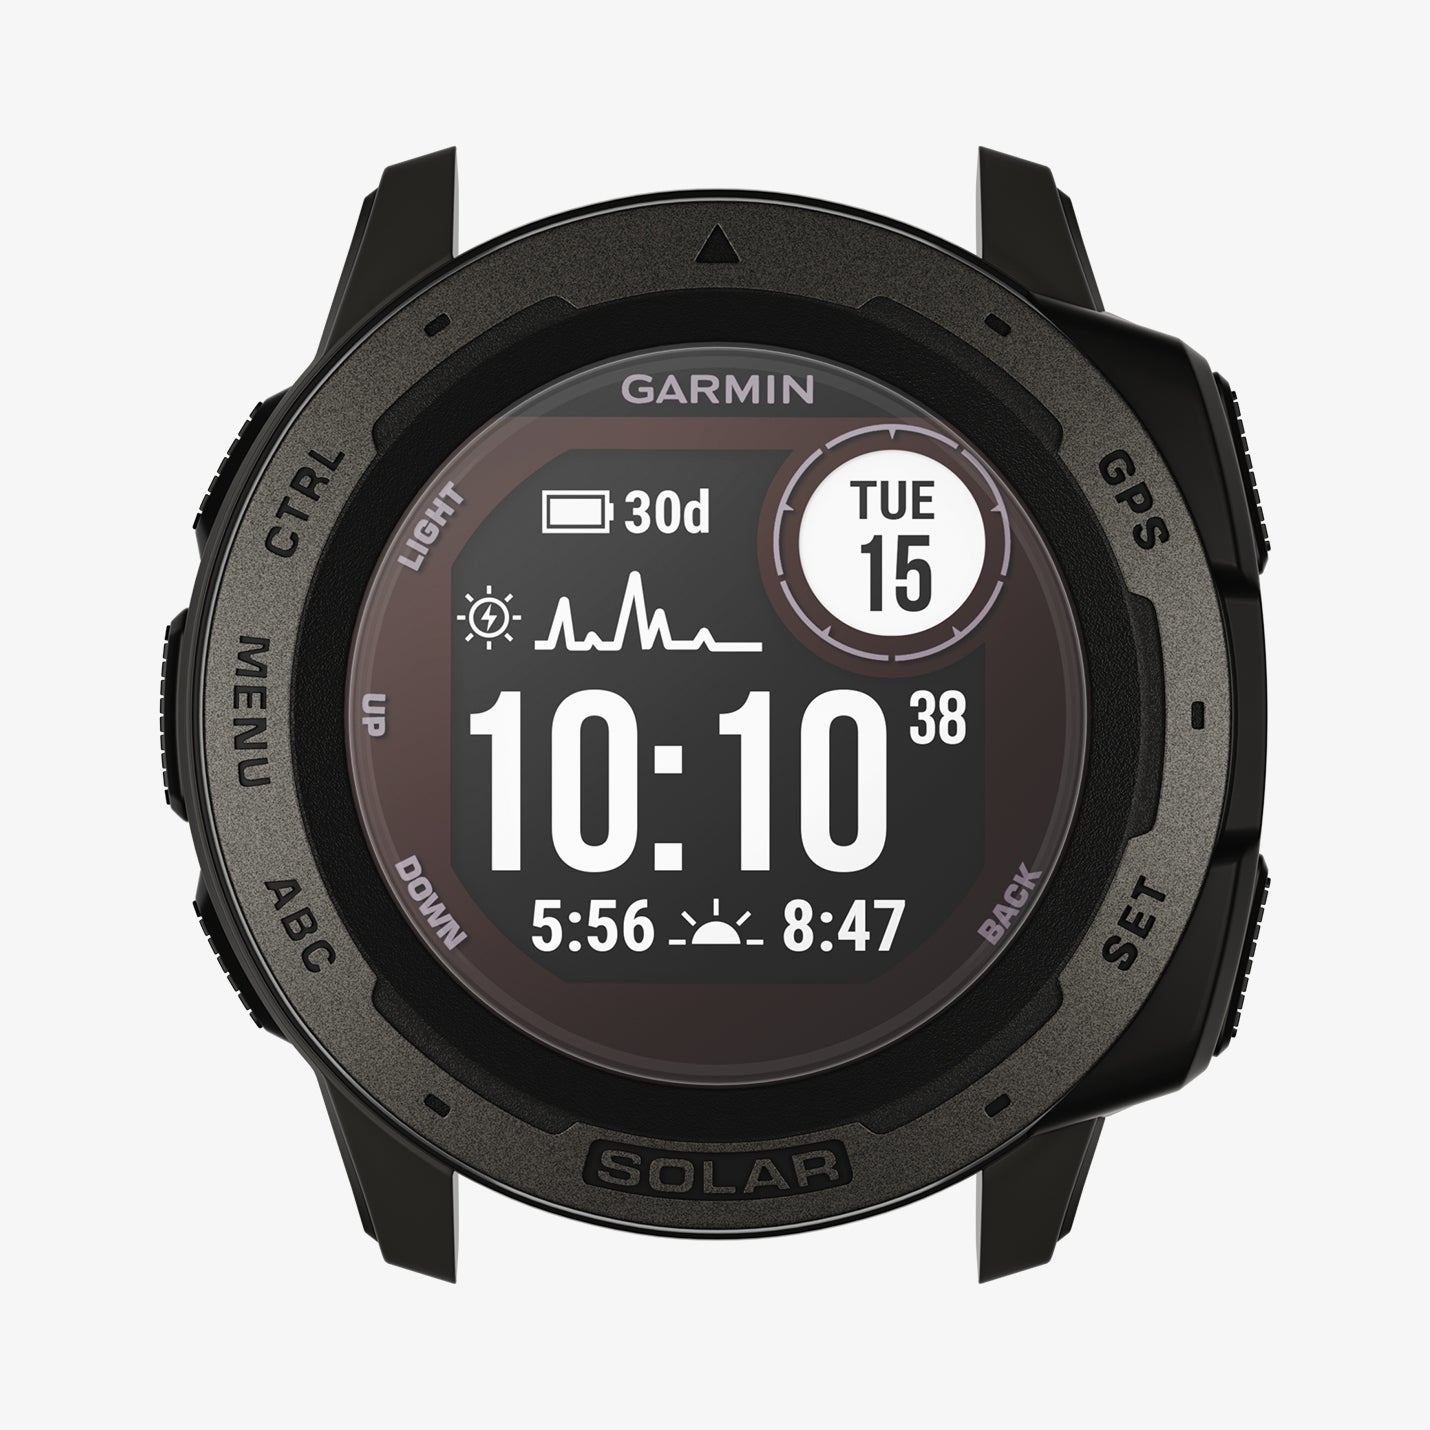 AGL02994 - Garmin Instinct Screen Protector EZ FIT Glas.tR showing the front